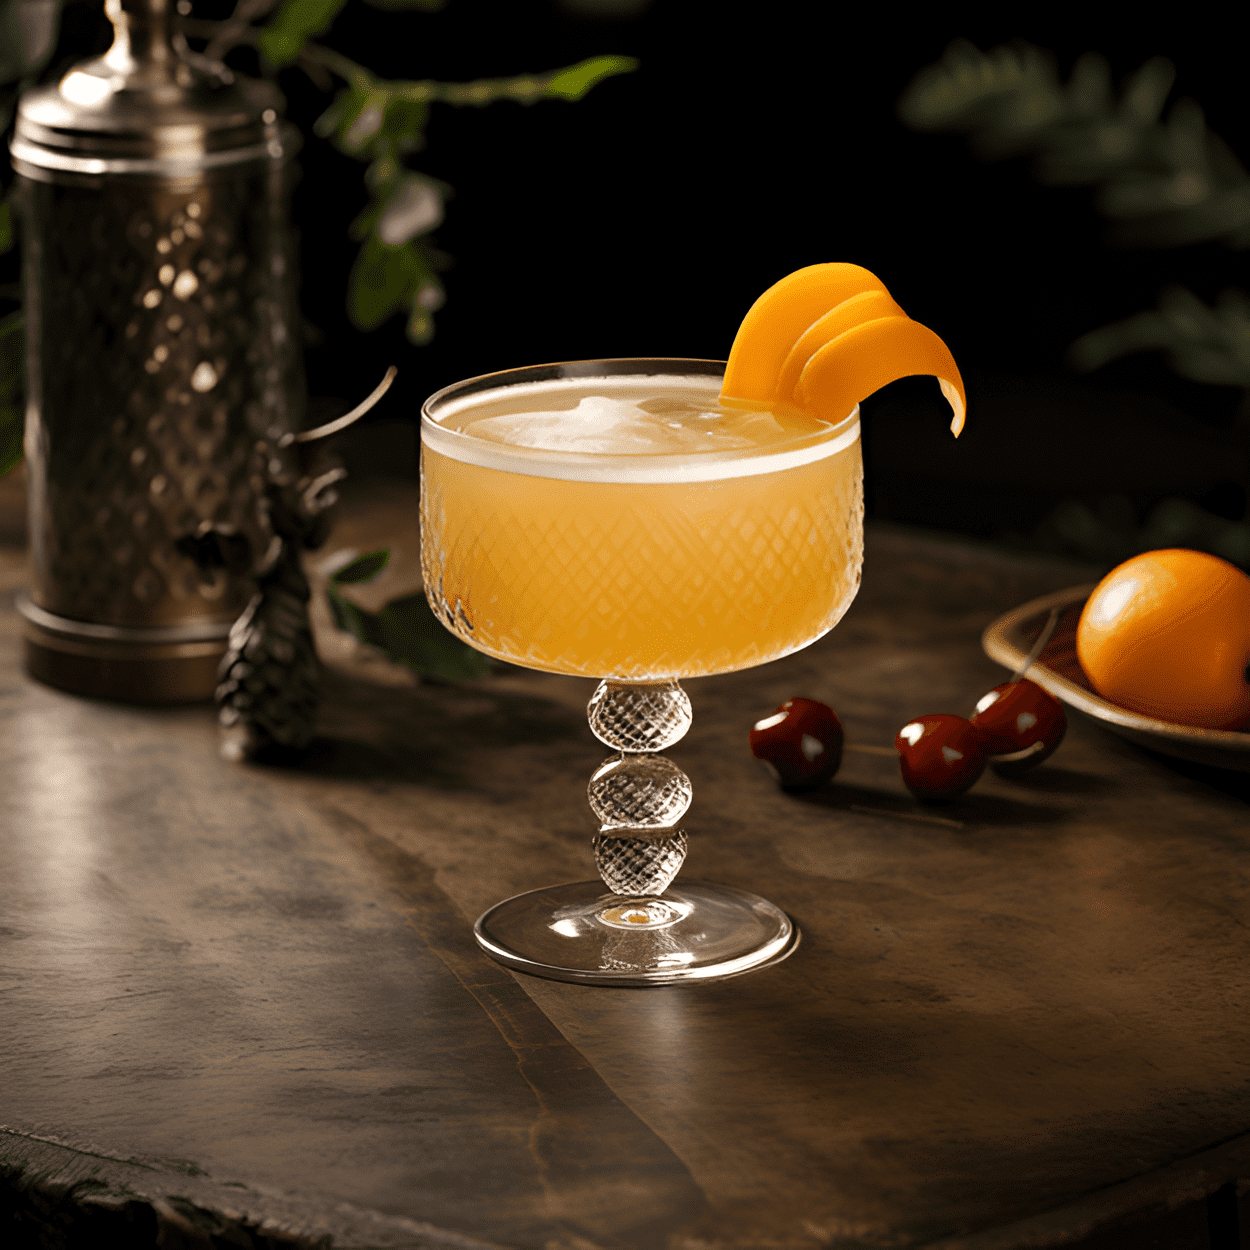 Quaker's Cocktail Recipe - The Quaker's Cocktail has a complex and well-rounded taste, with a perfect balance of sweet, sour, and bitter notes. The combination of gin, apricot brandy, and lemon juice creates a refreshing and slightly tart flavor, while the addition of aromatic bitters adds depth and complexity.